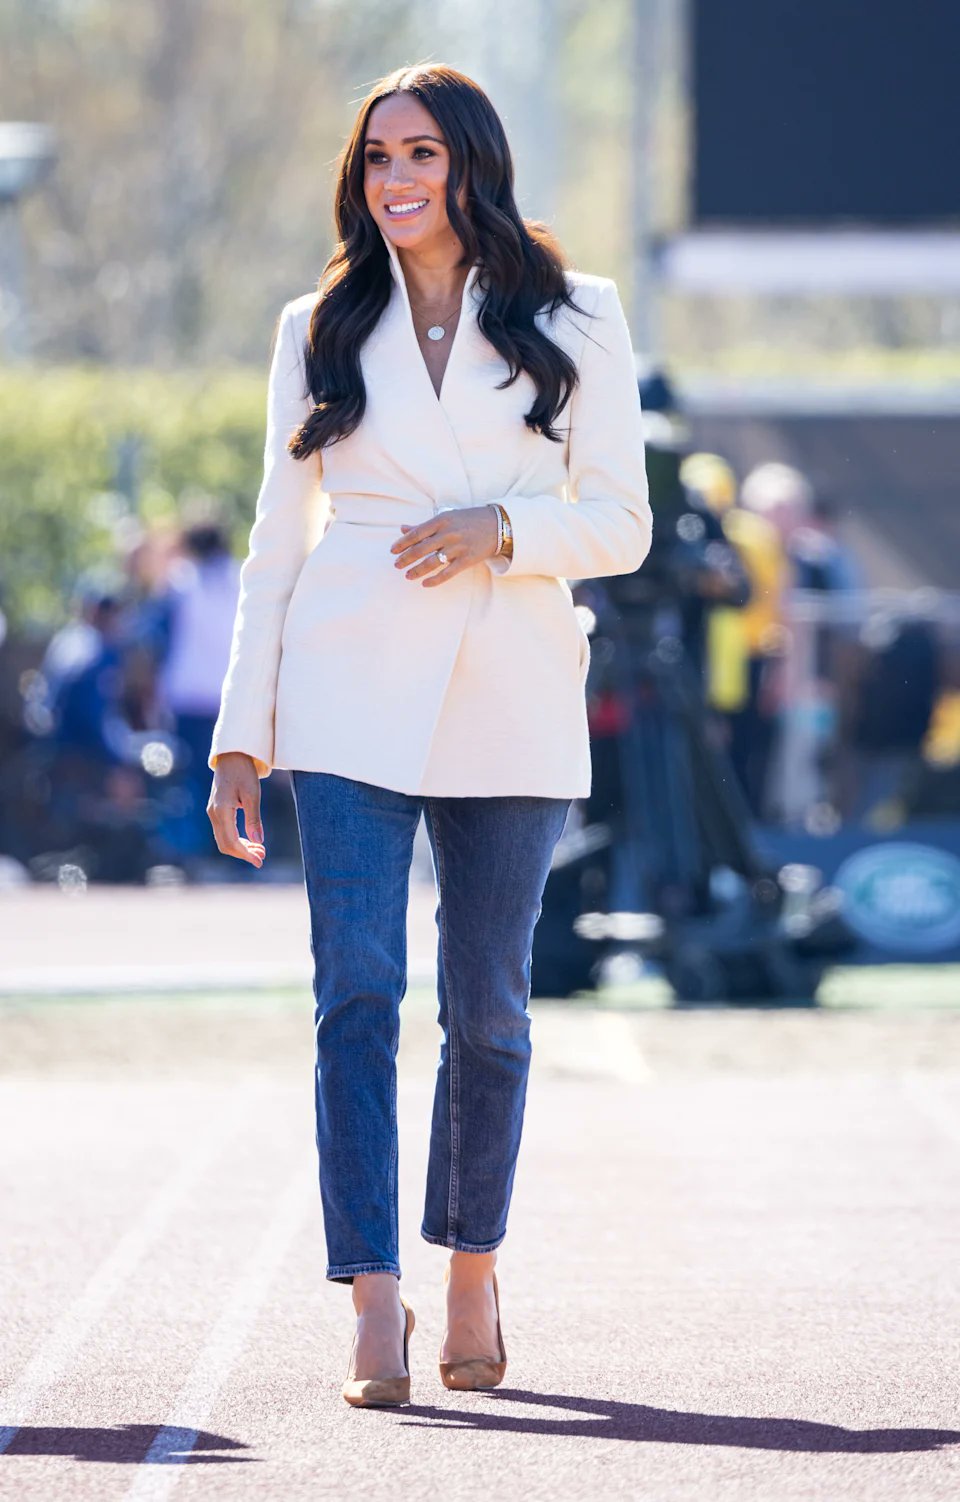 Meghan Markle, Duchess of Sussex wore Brandon Maxwell  @ day 2 of the Invictus Games